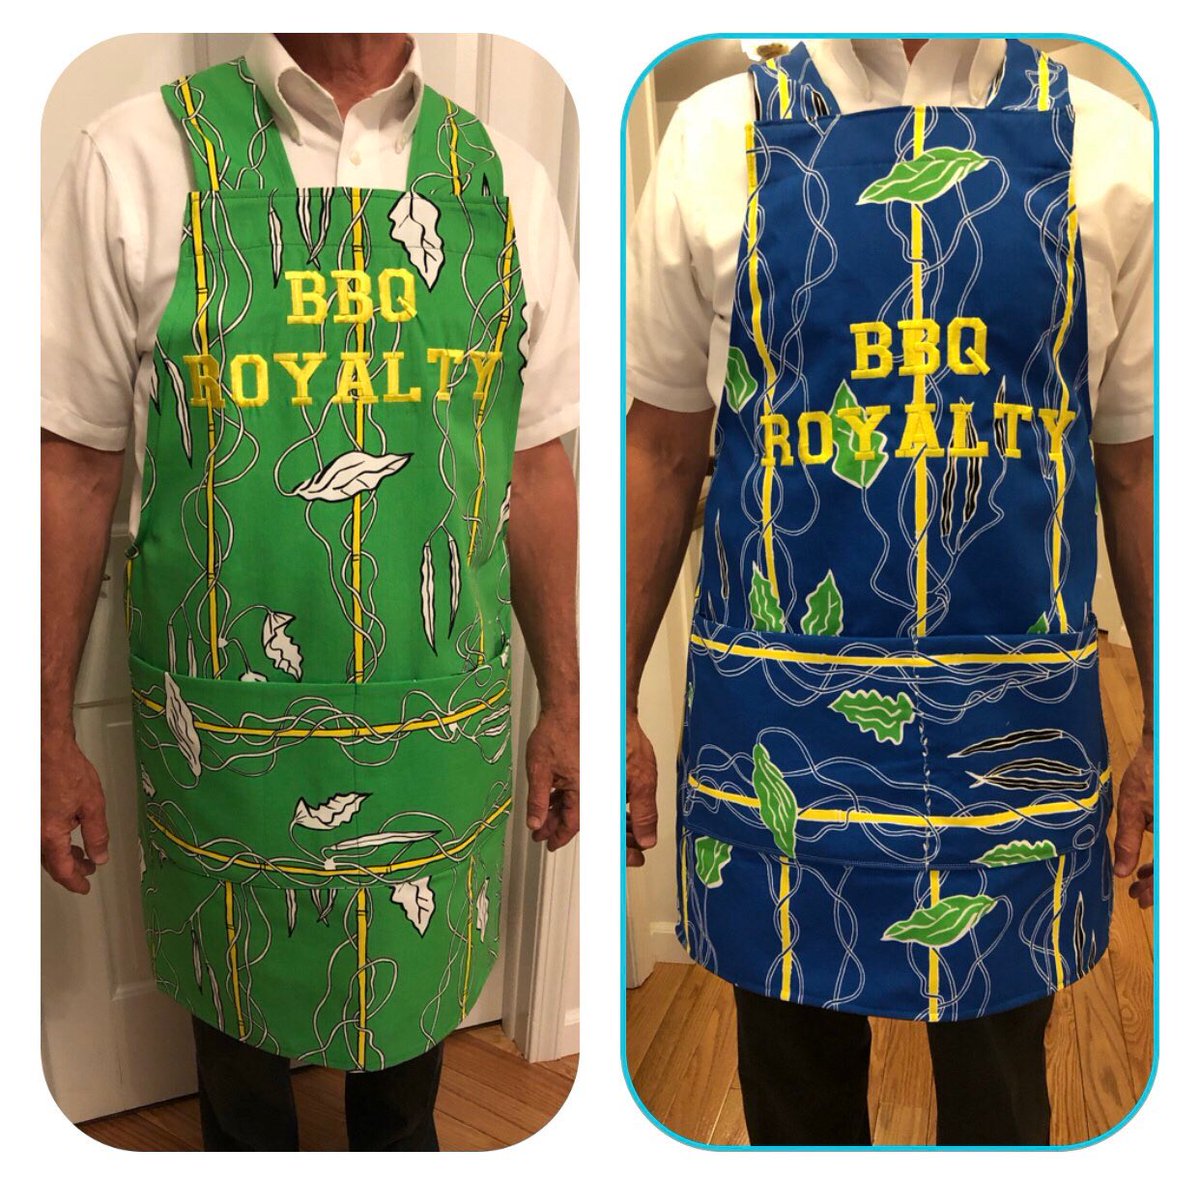 Excited to share the latest addition to my #etsy shop: BBQ ROYALTY / Apron / cobbler 'No ties'  heavy weight Cotton like fabric #housewares #cobblerapron #outdoorapron #grillingapron etsy.me/2JutJzT